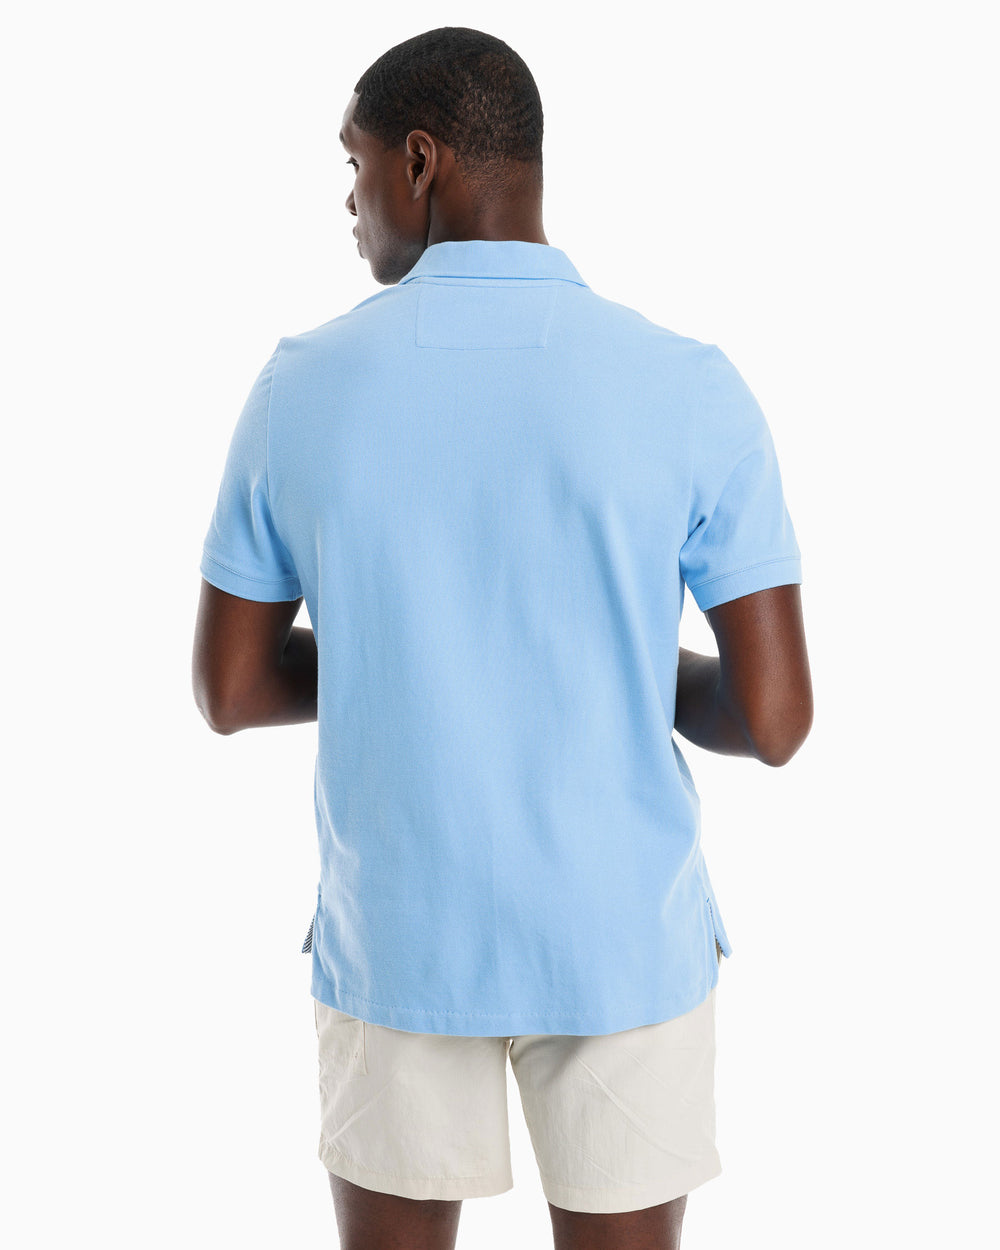 The model back view of the Men's New Skipjack Polo Shirt by Southern Tide - Ocean Channel